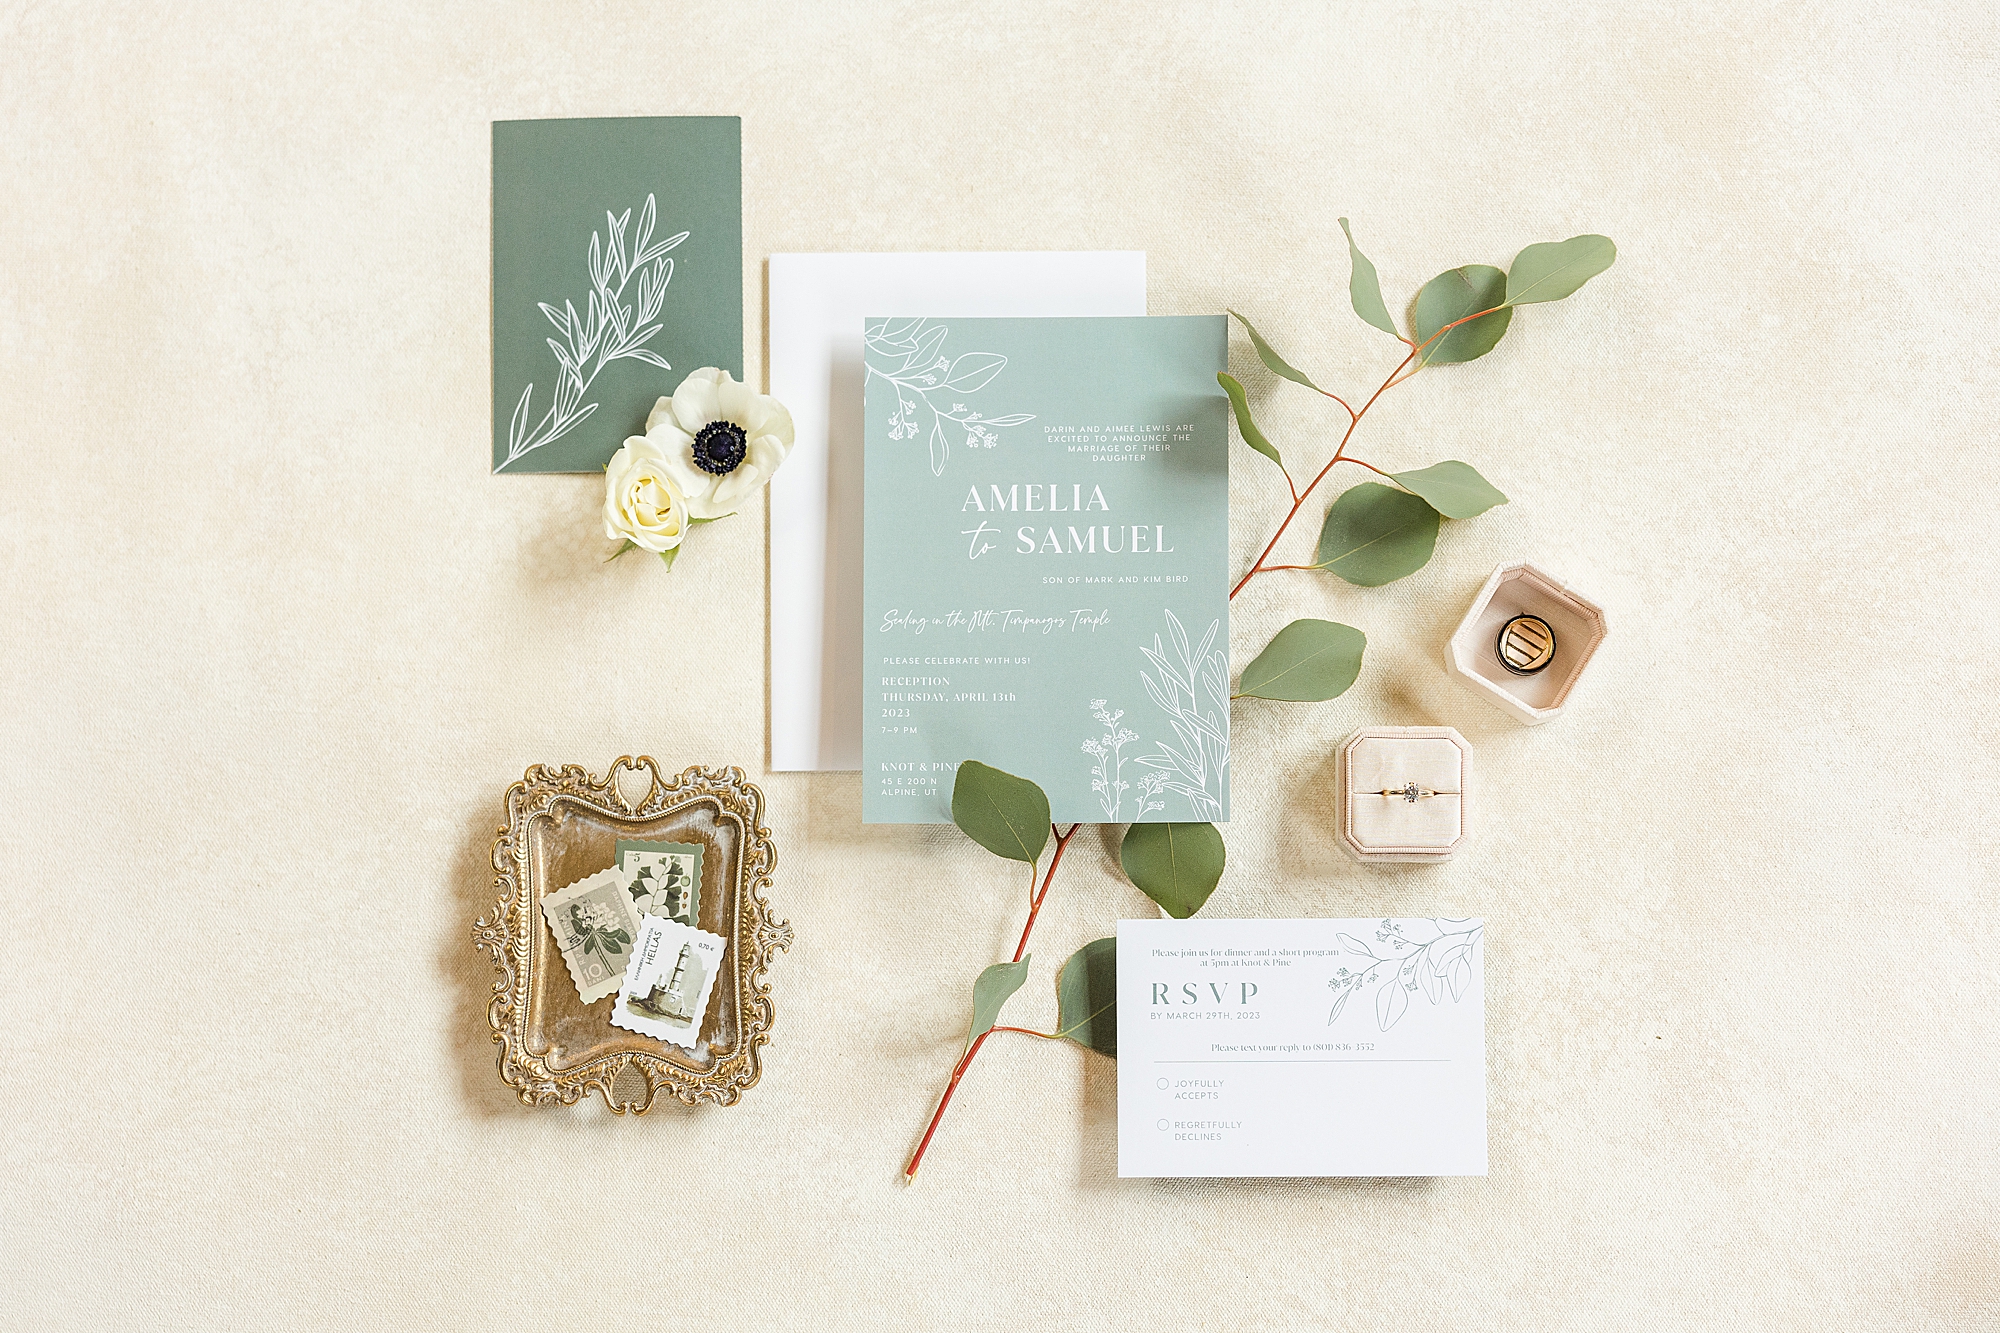 Elegant wedding invitation card with sage green and ivory accents
